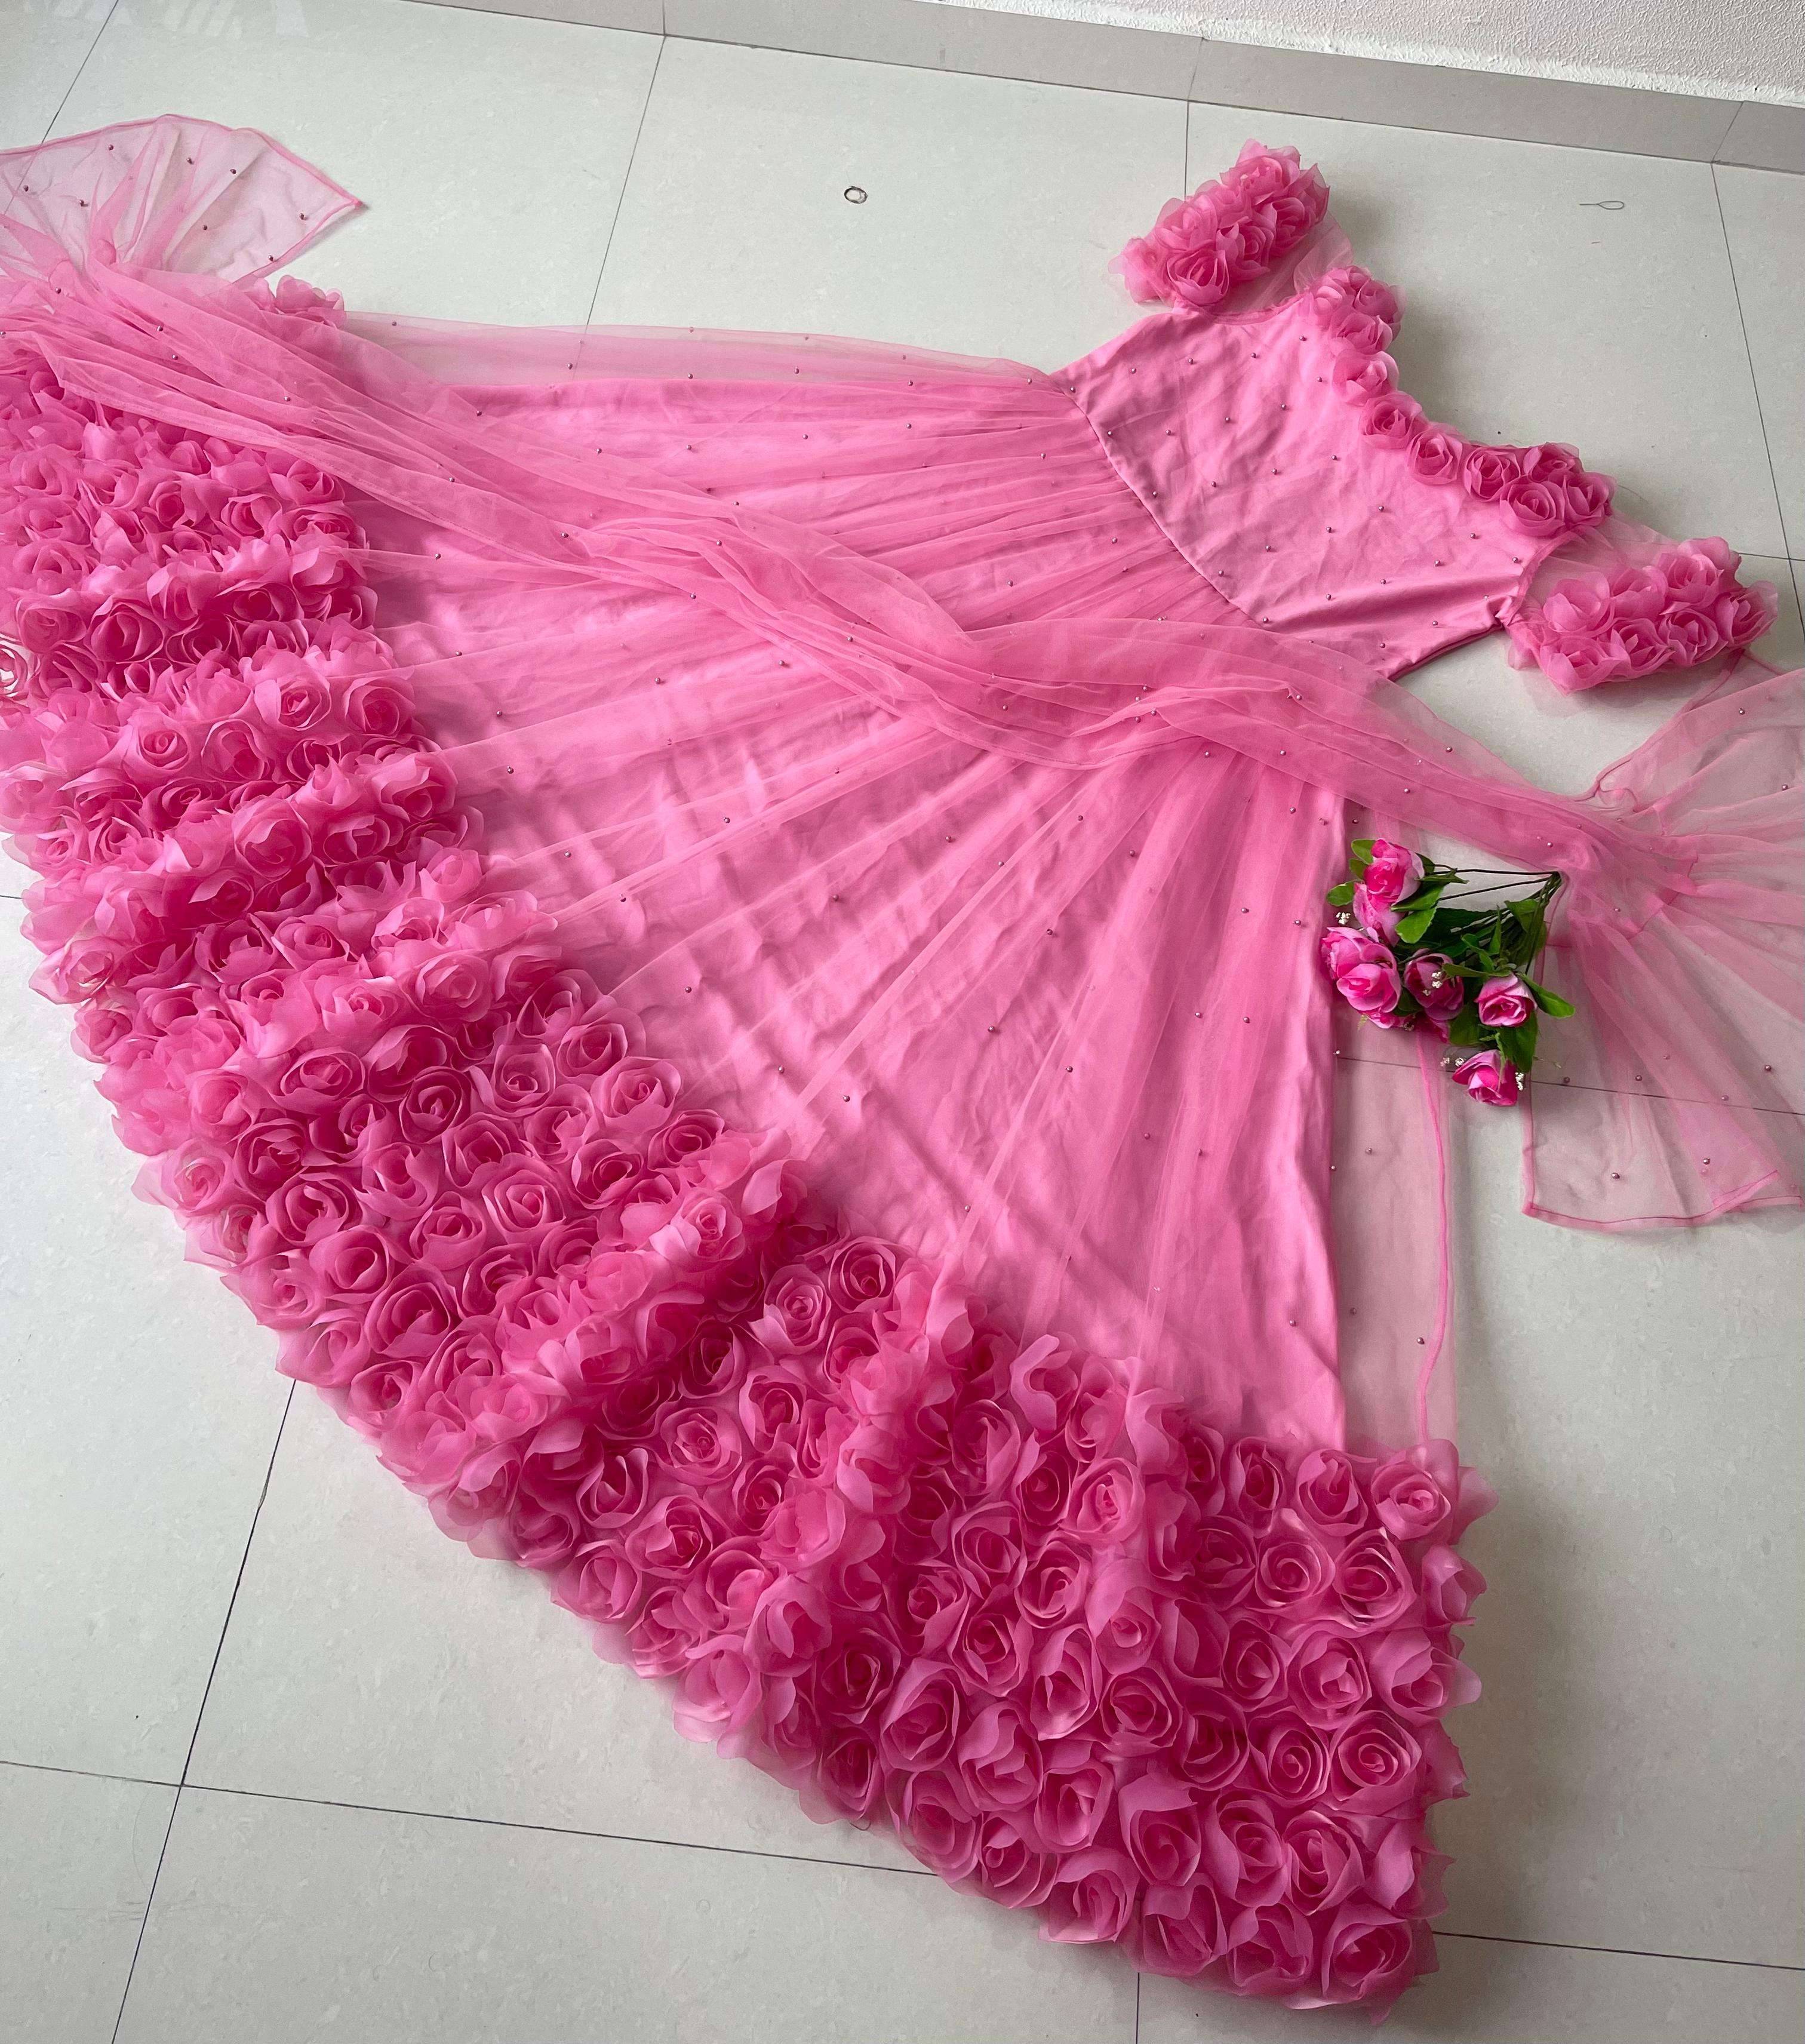 Girls Gown: Girls Gown Dress | Party Wear Gown For Baby Girl